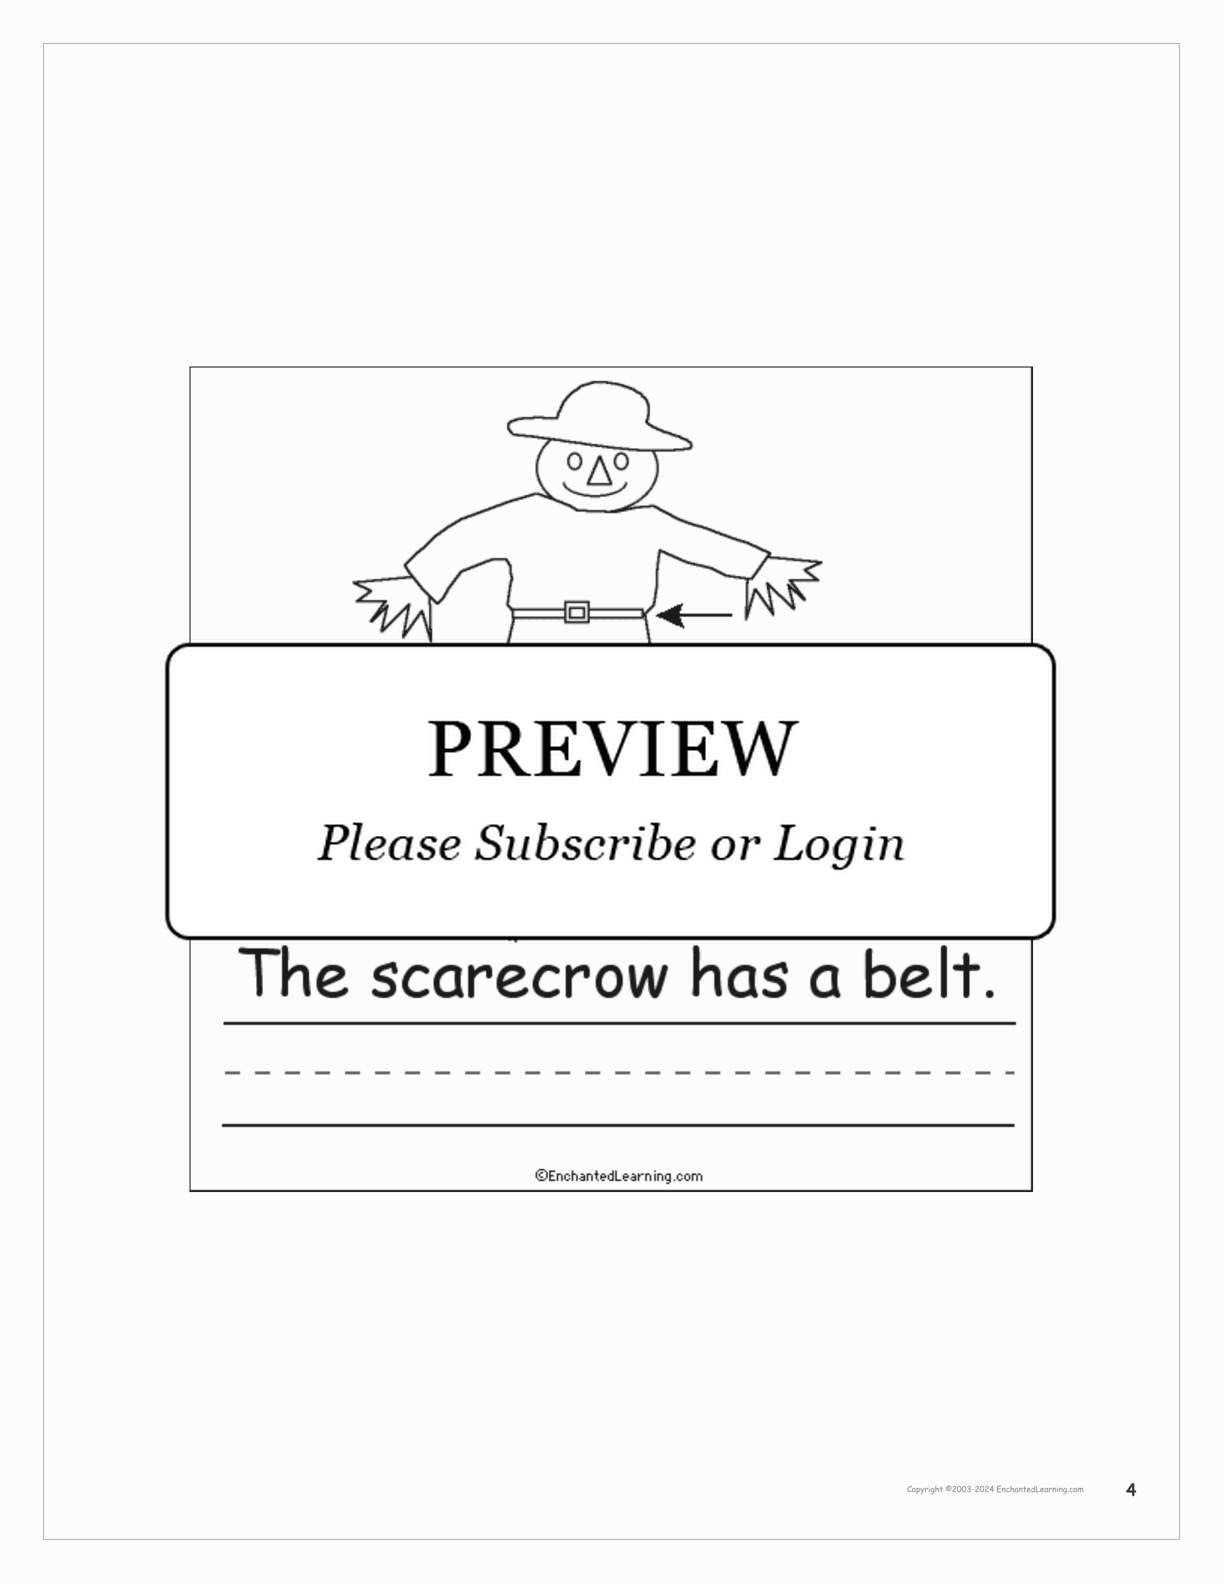 The Scarecrow's Clothes interactive printout page 4